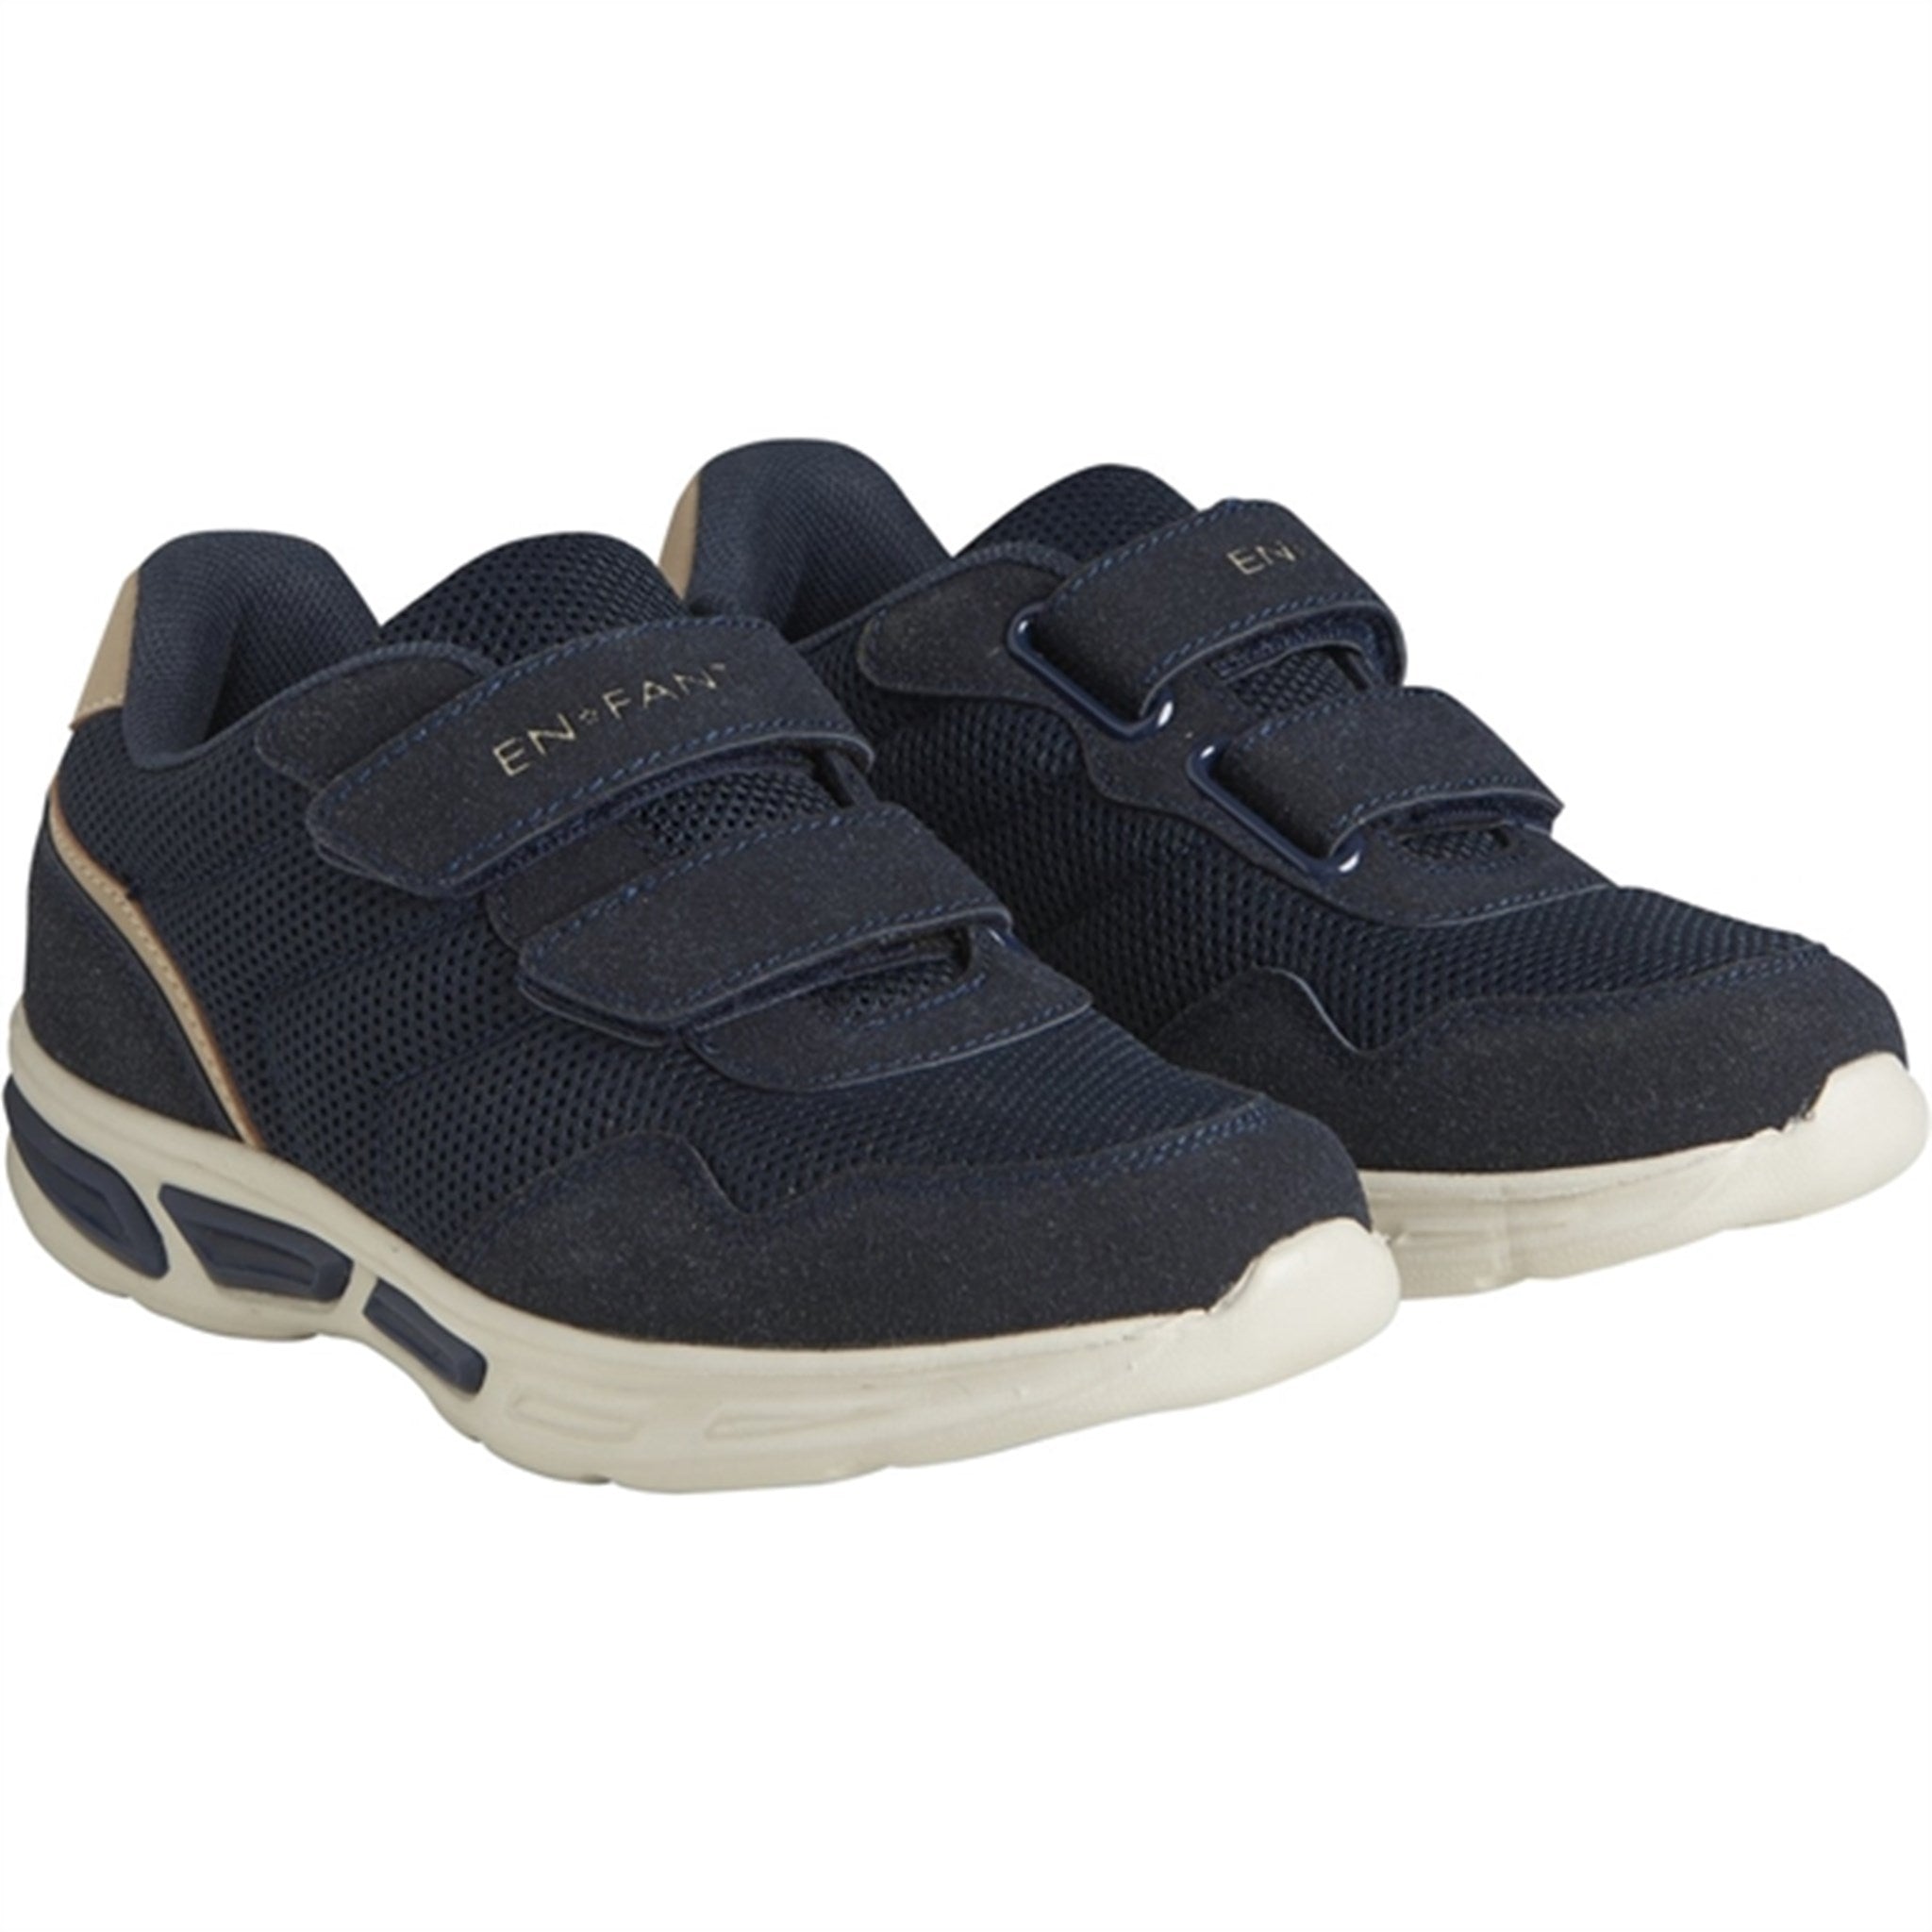 En Fant Sneakers Velcro with Light India ink